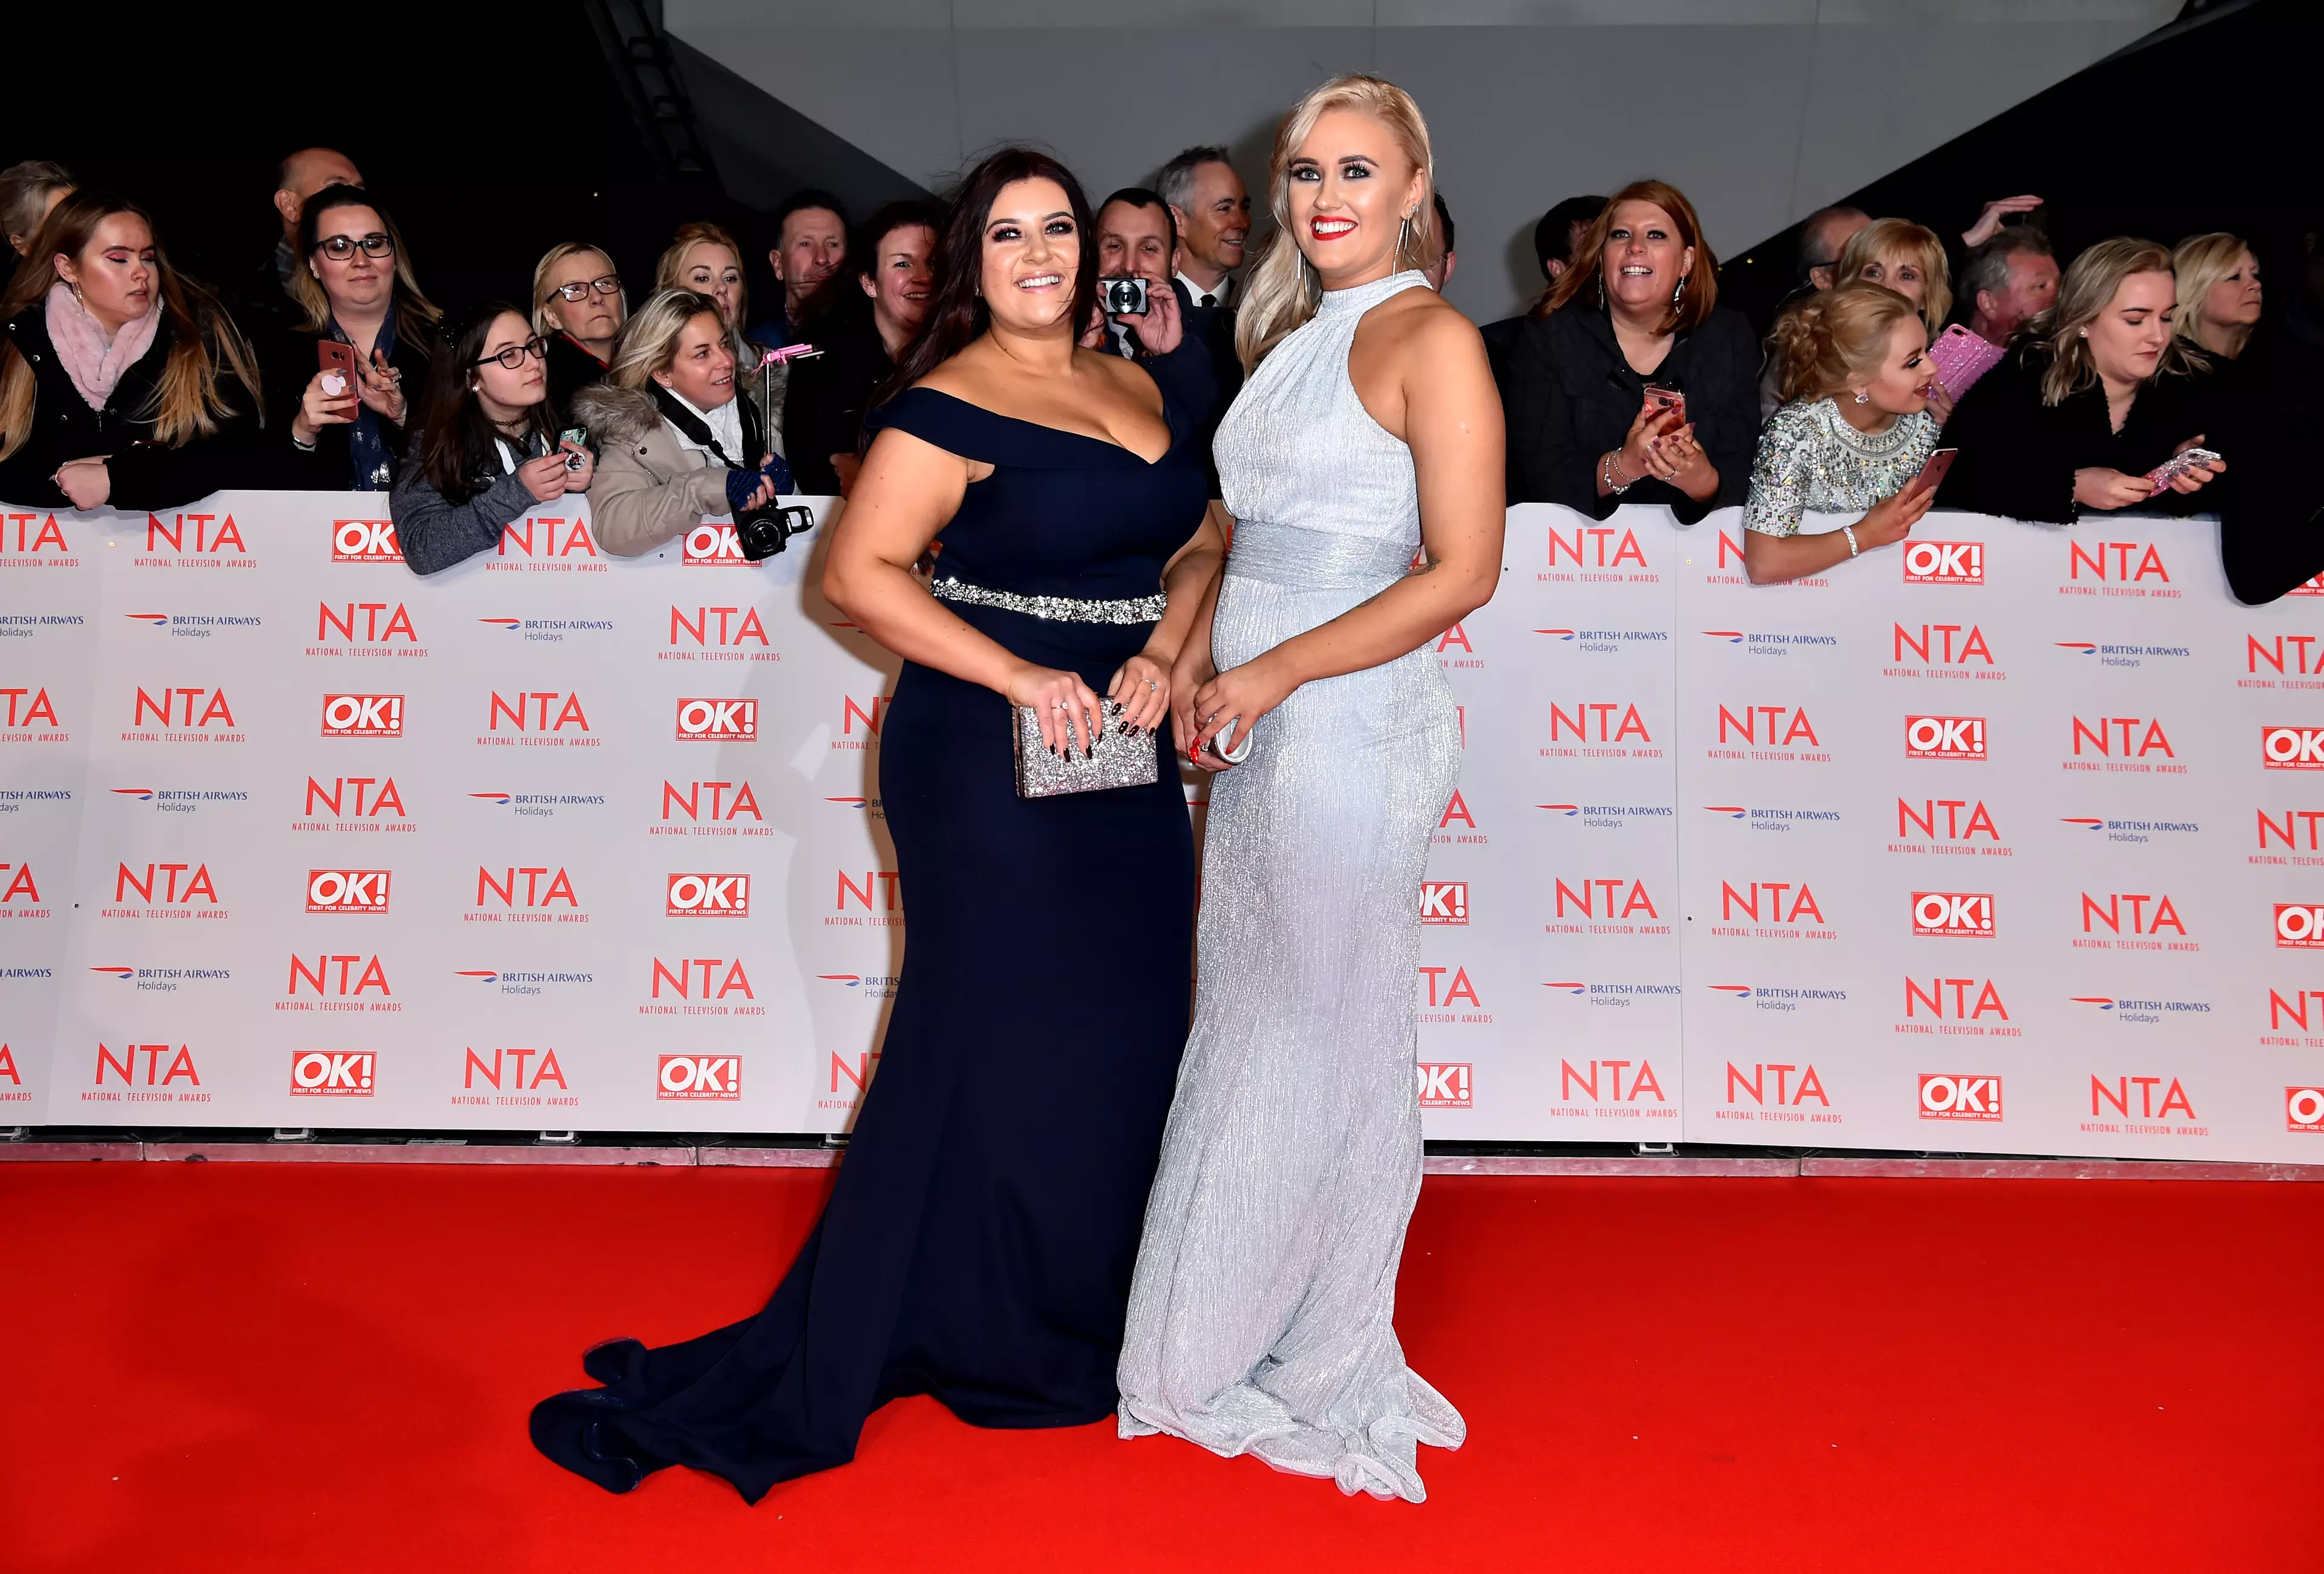 The sisters from Leeds at the National Television Awards.